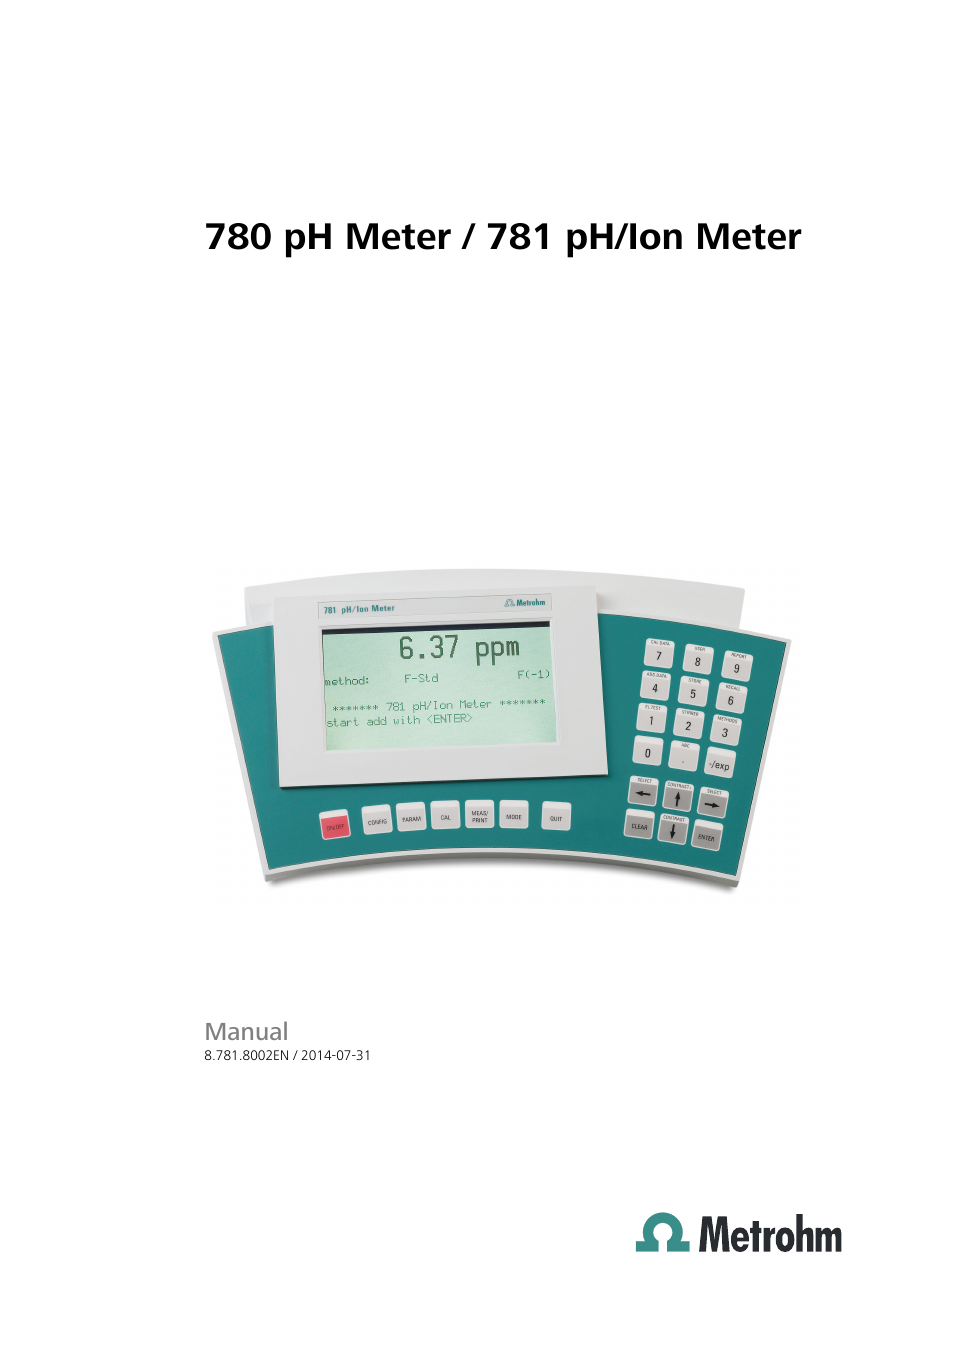 Metrohm 781 pH/Ion Meter User Manual | 177 pages | Also for: 780 pH Meter